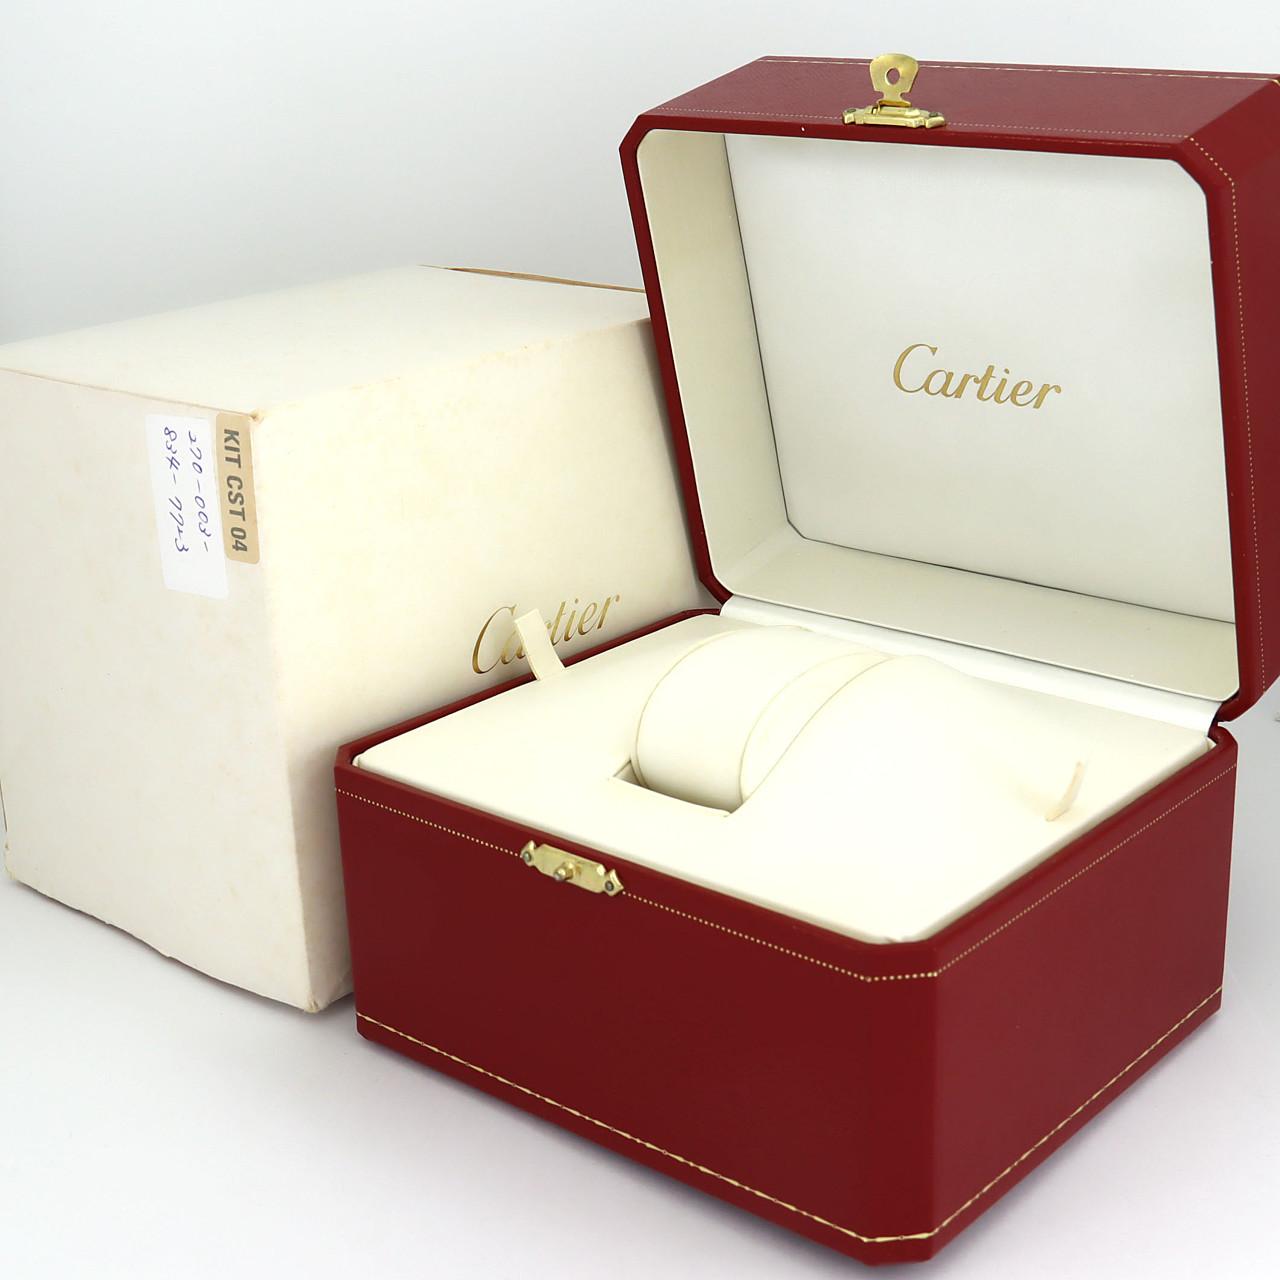 Cartier Tank American LM PG W2607156 PG/RG Automatic